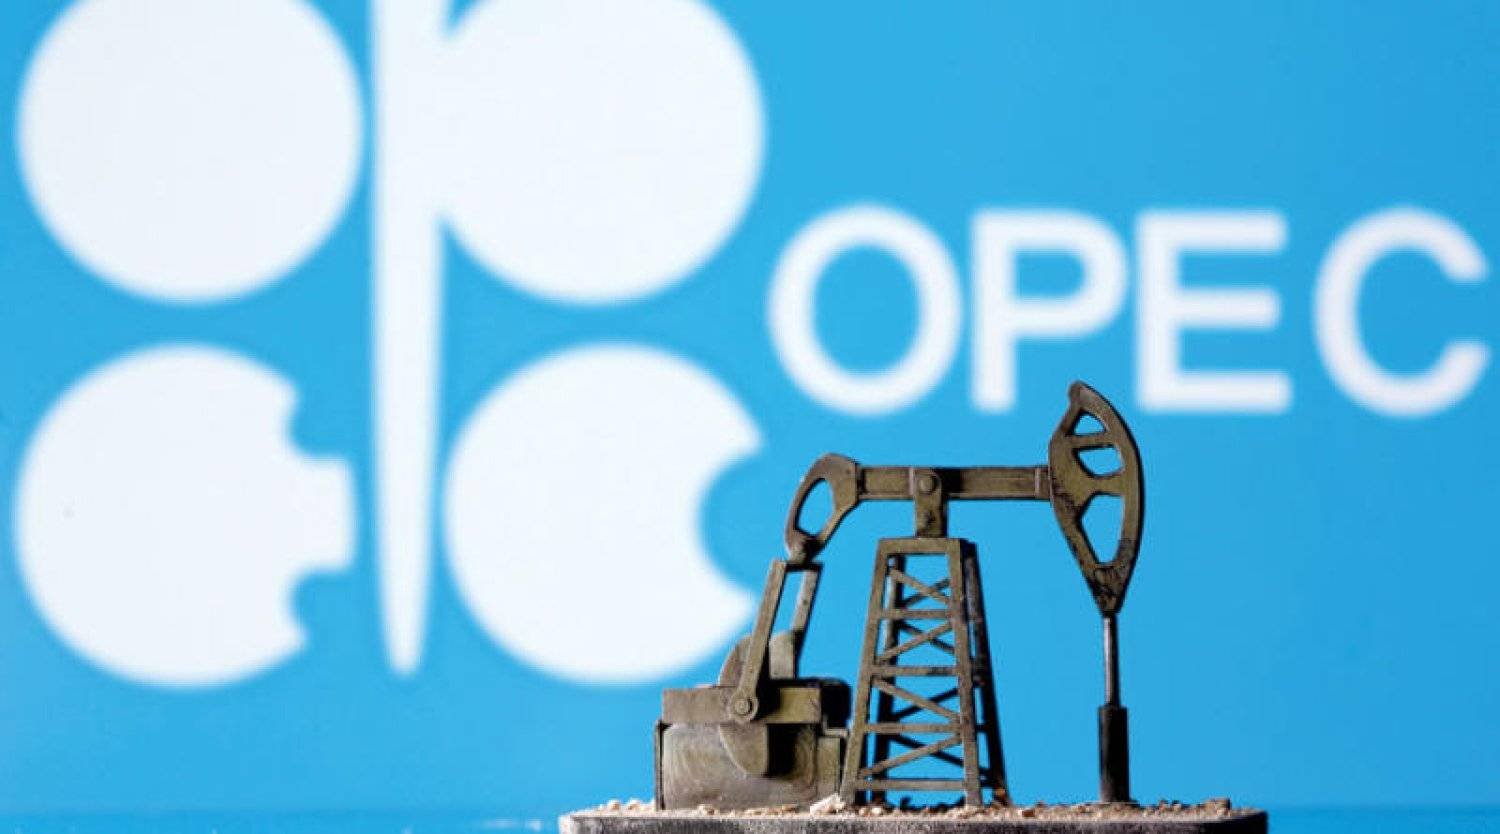 OPEC switches to 'call on OPEC+' in global oil demand outlook: Reuters